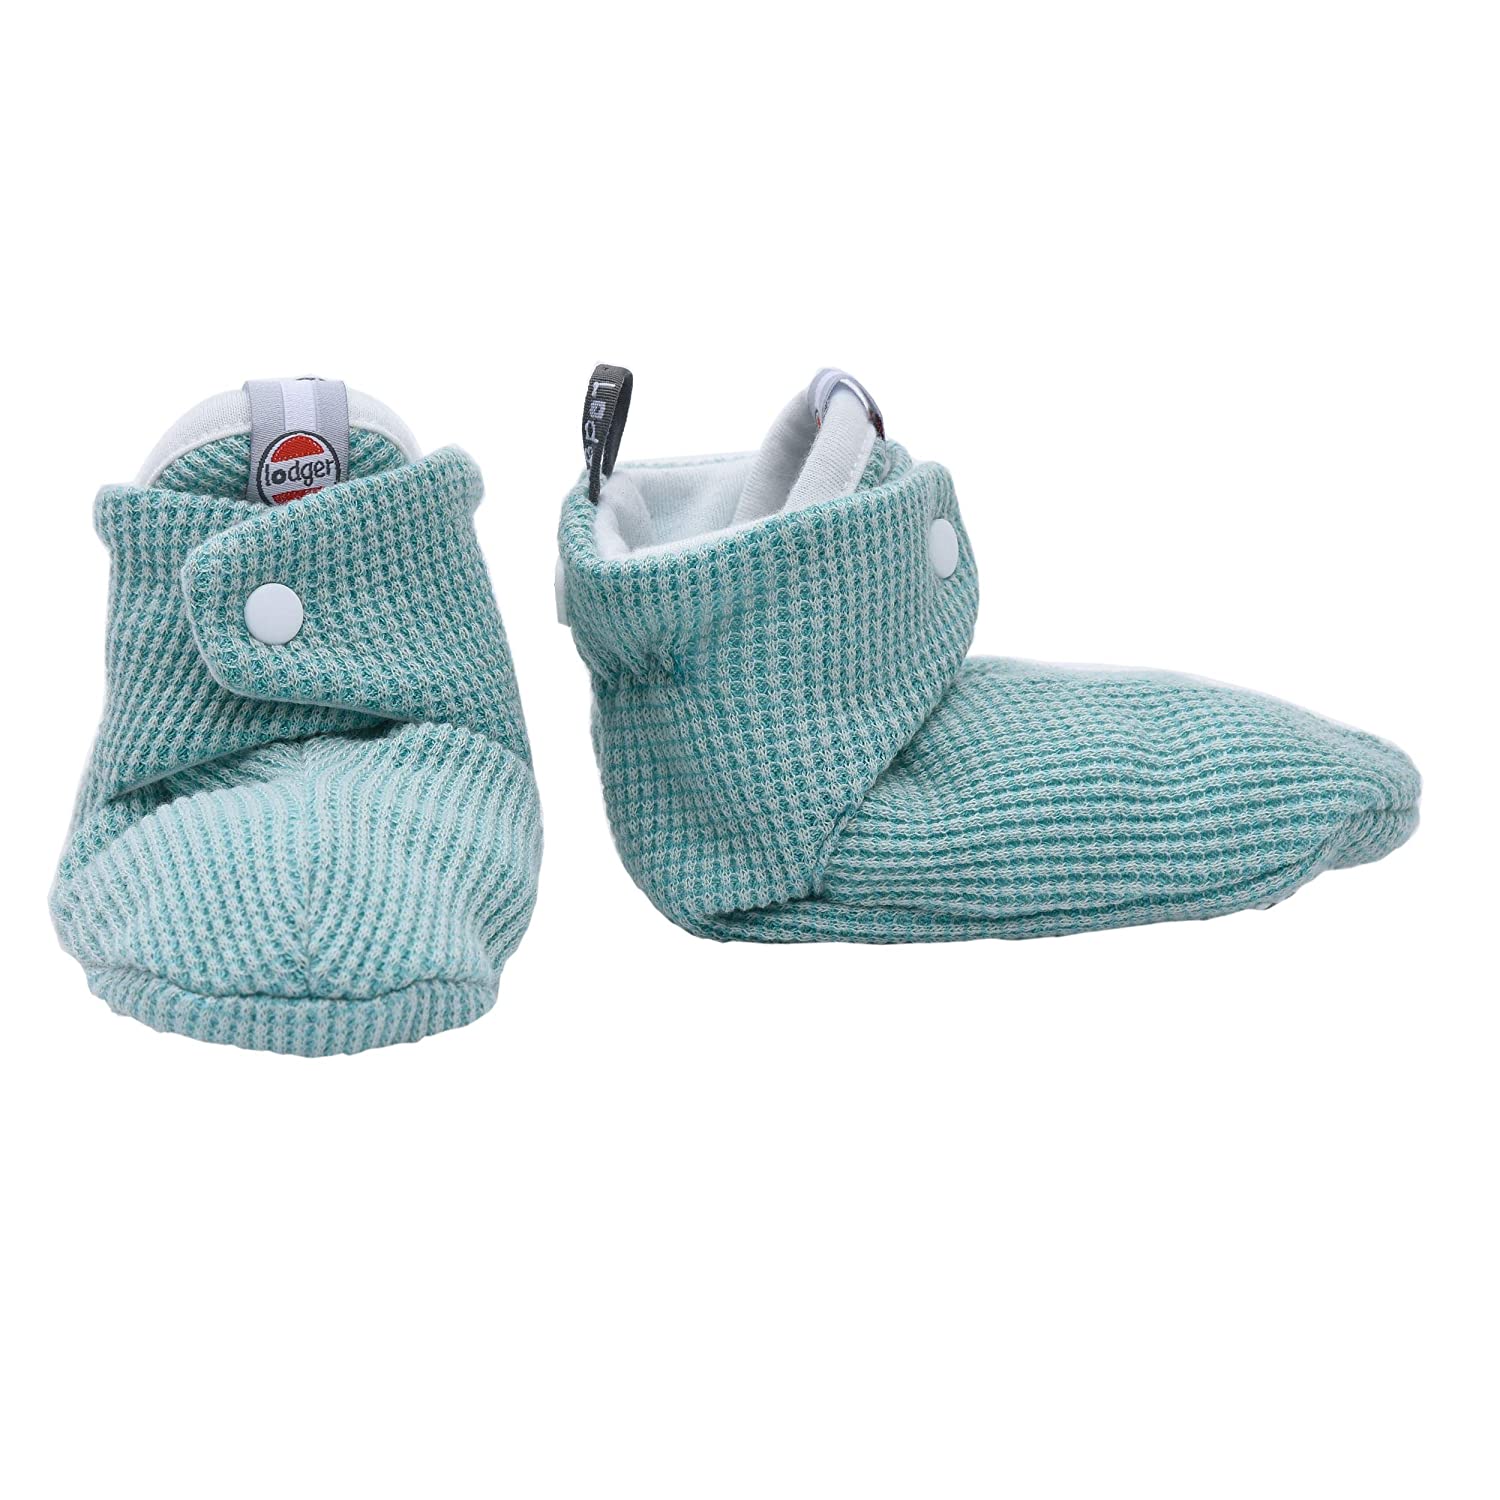 Lodger SL11.1.06.003 080 0 Crawling Shoes Cotton Slippers Ciumbelle, 0-3 Months, S, Green